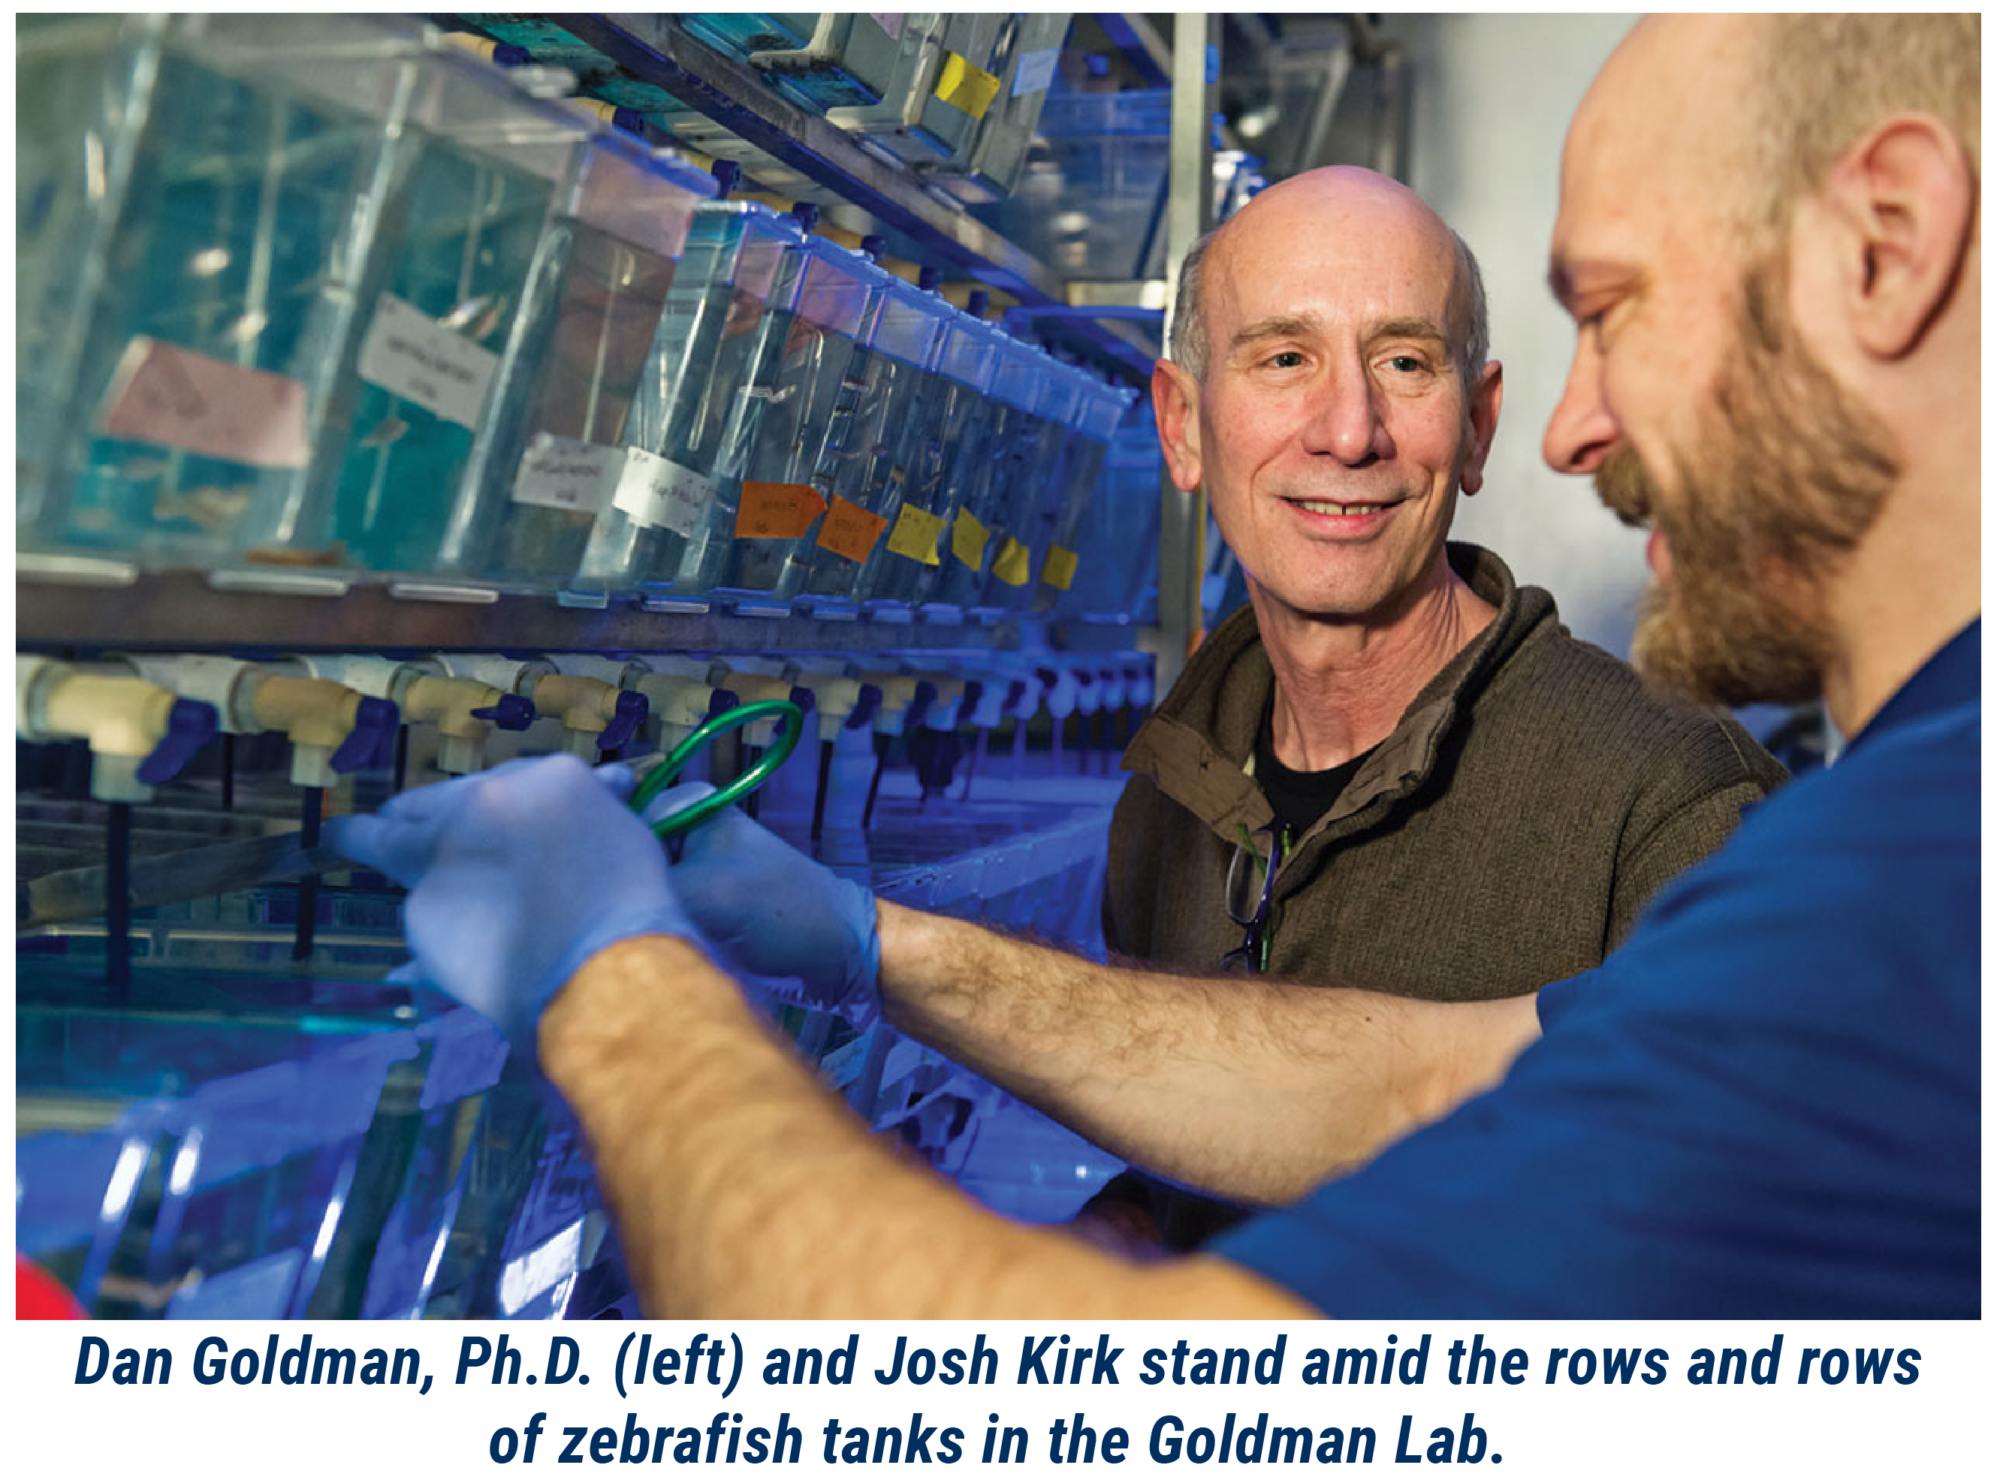 Dan Goldman, Ph.D. (left) and Josh Kirk stand amid the rows and rows of zebrafish tanks in the Goldman Lab